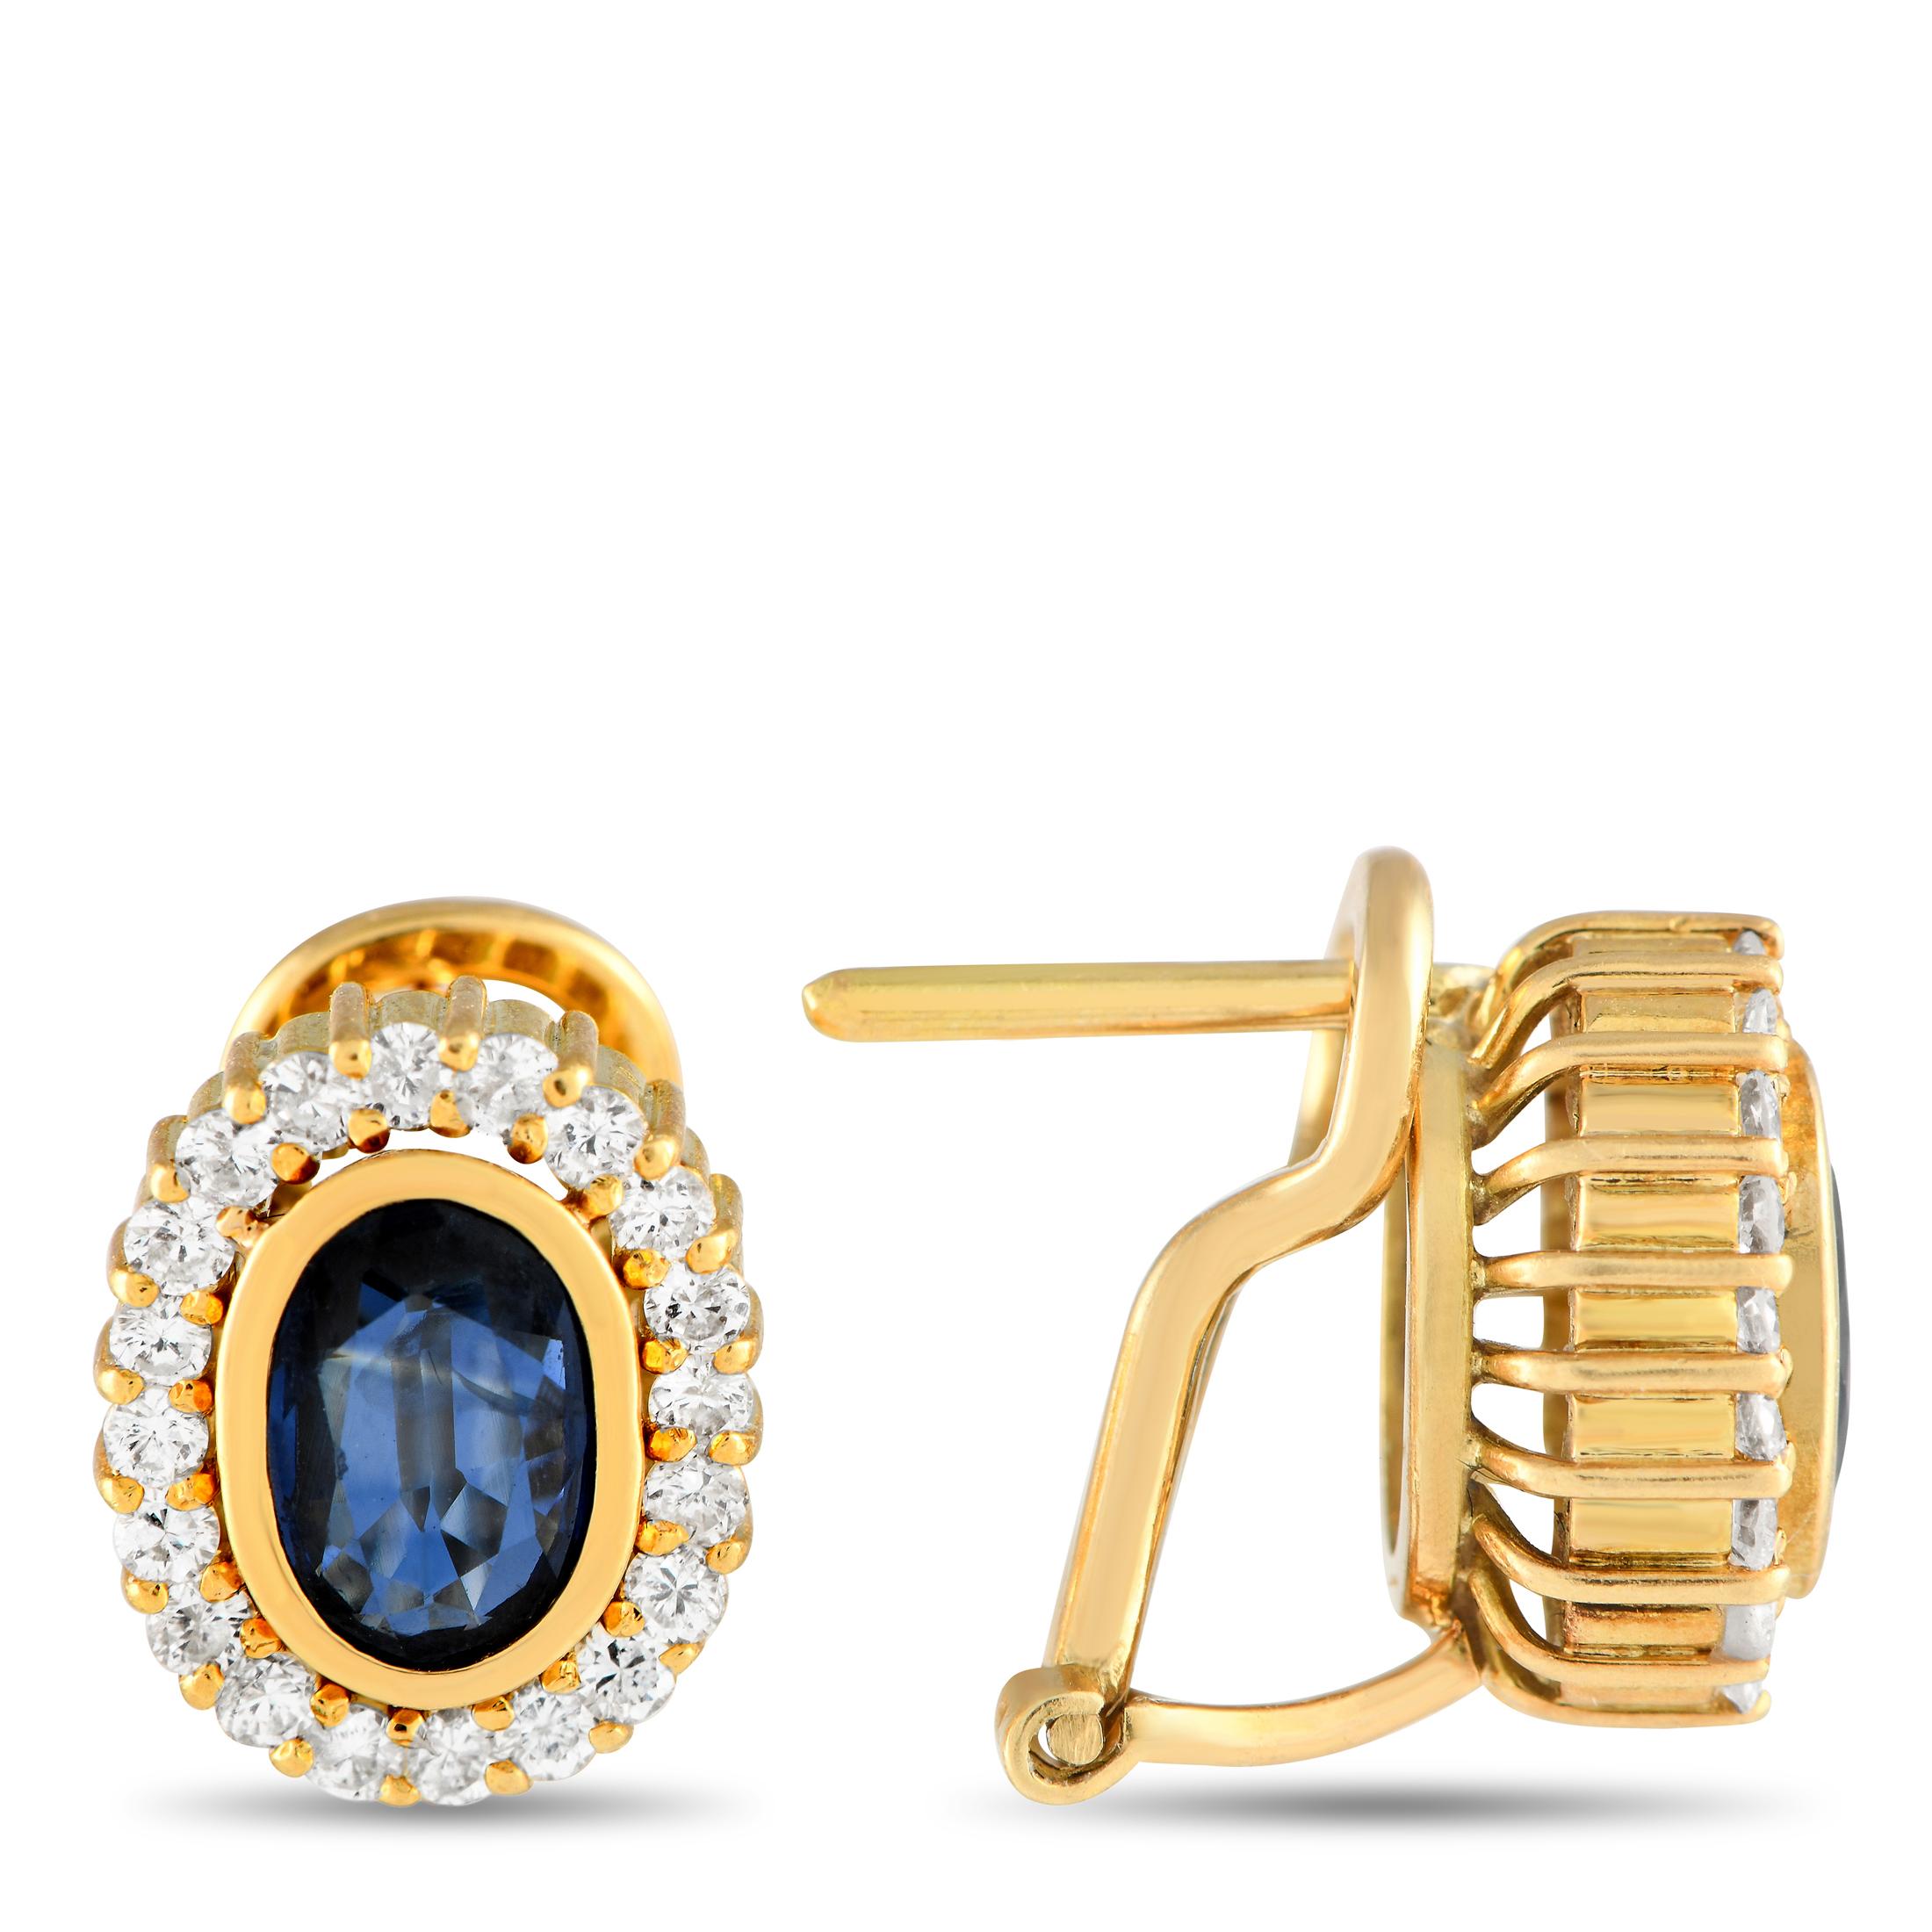 These classically elegant earrings will never go out of style. At the center of each earring, youll find a captivating oval-cut sapphires that together total 1.0 carats. Additional Diamond accents with a total weight of 0.50 carats add extra sparkle